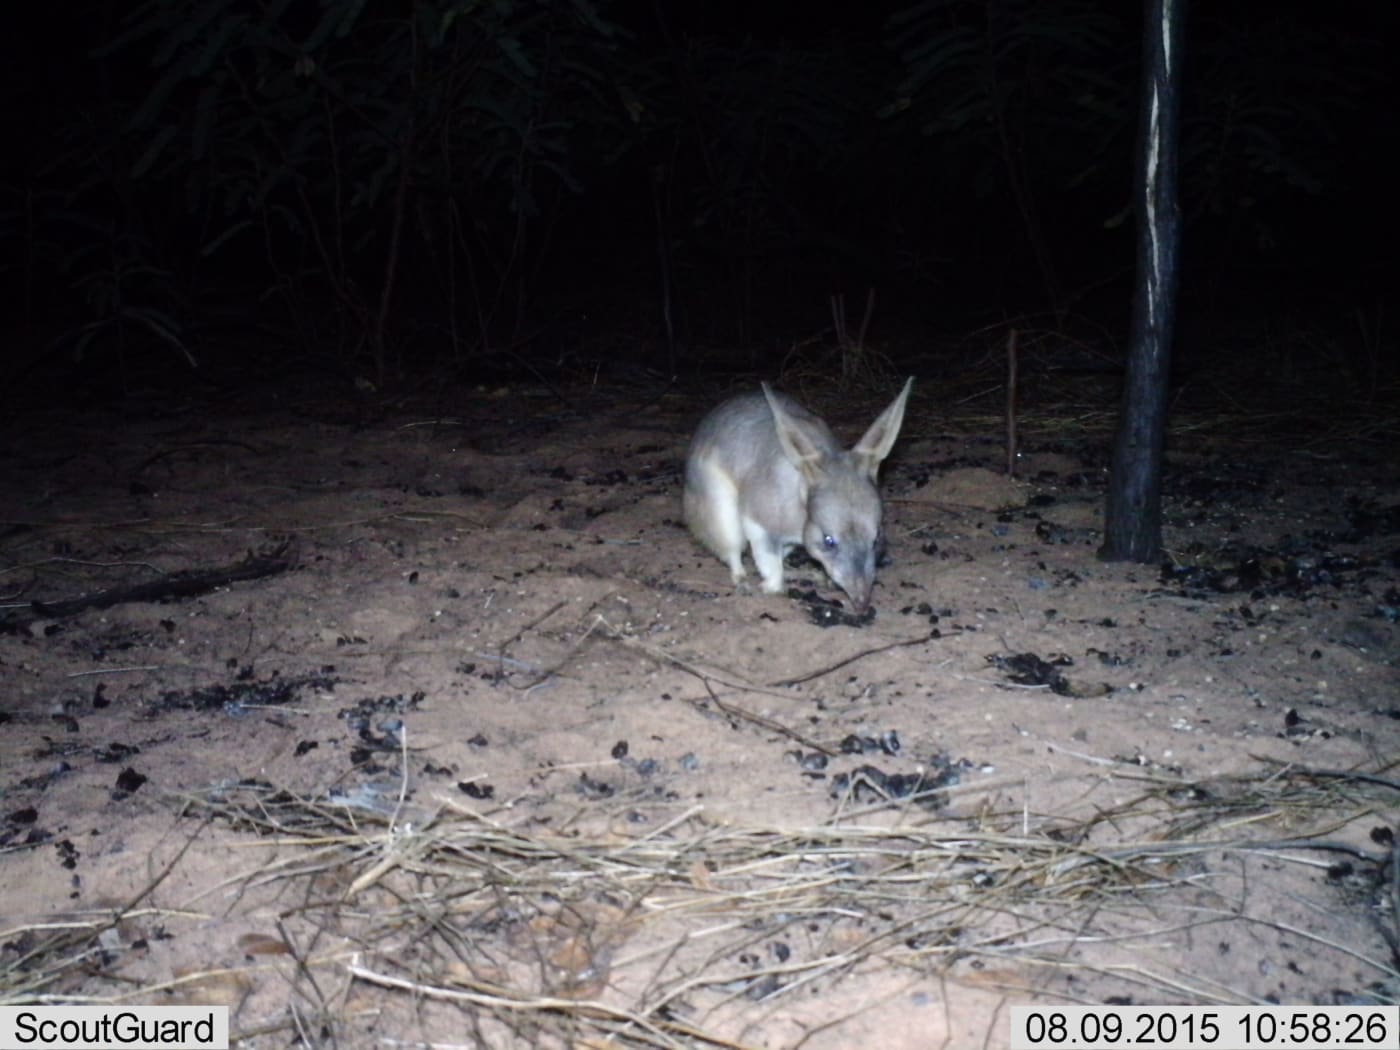 Bilby (Macrotis lagotis) caught on sensor camera in Yawuru Country (Roebuck Plains), the Kimberley. August 2015.

Yawuru bilby project started in 2015 to help find populations of Bilby on Yawuru Country and map existing and potential habitat and address threats (fire and feral animals).